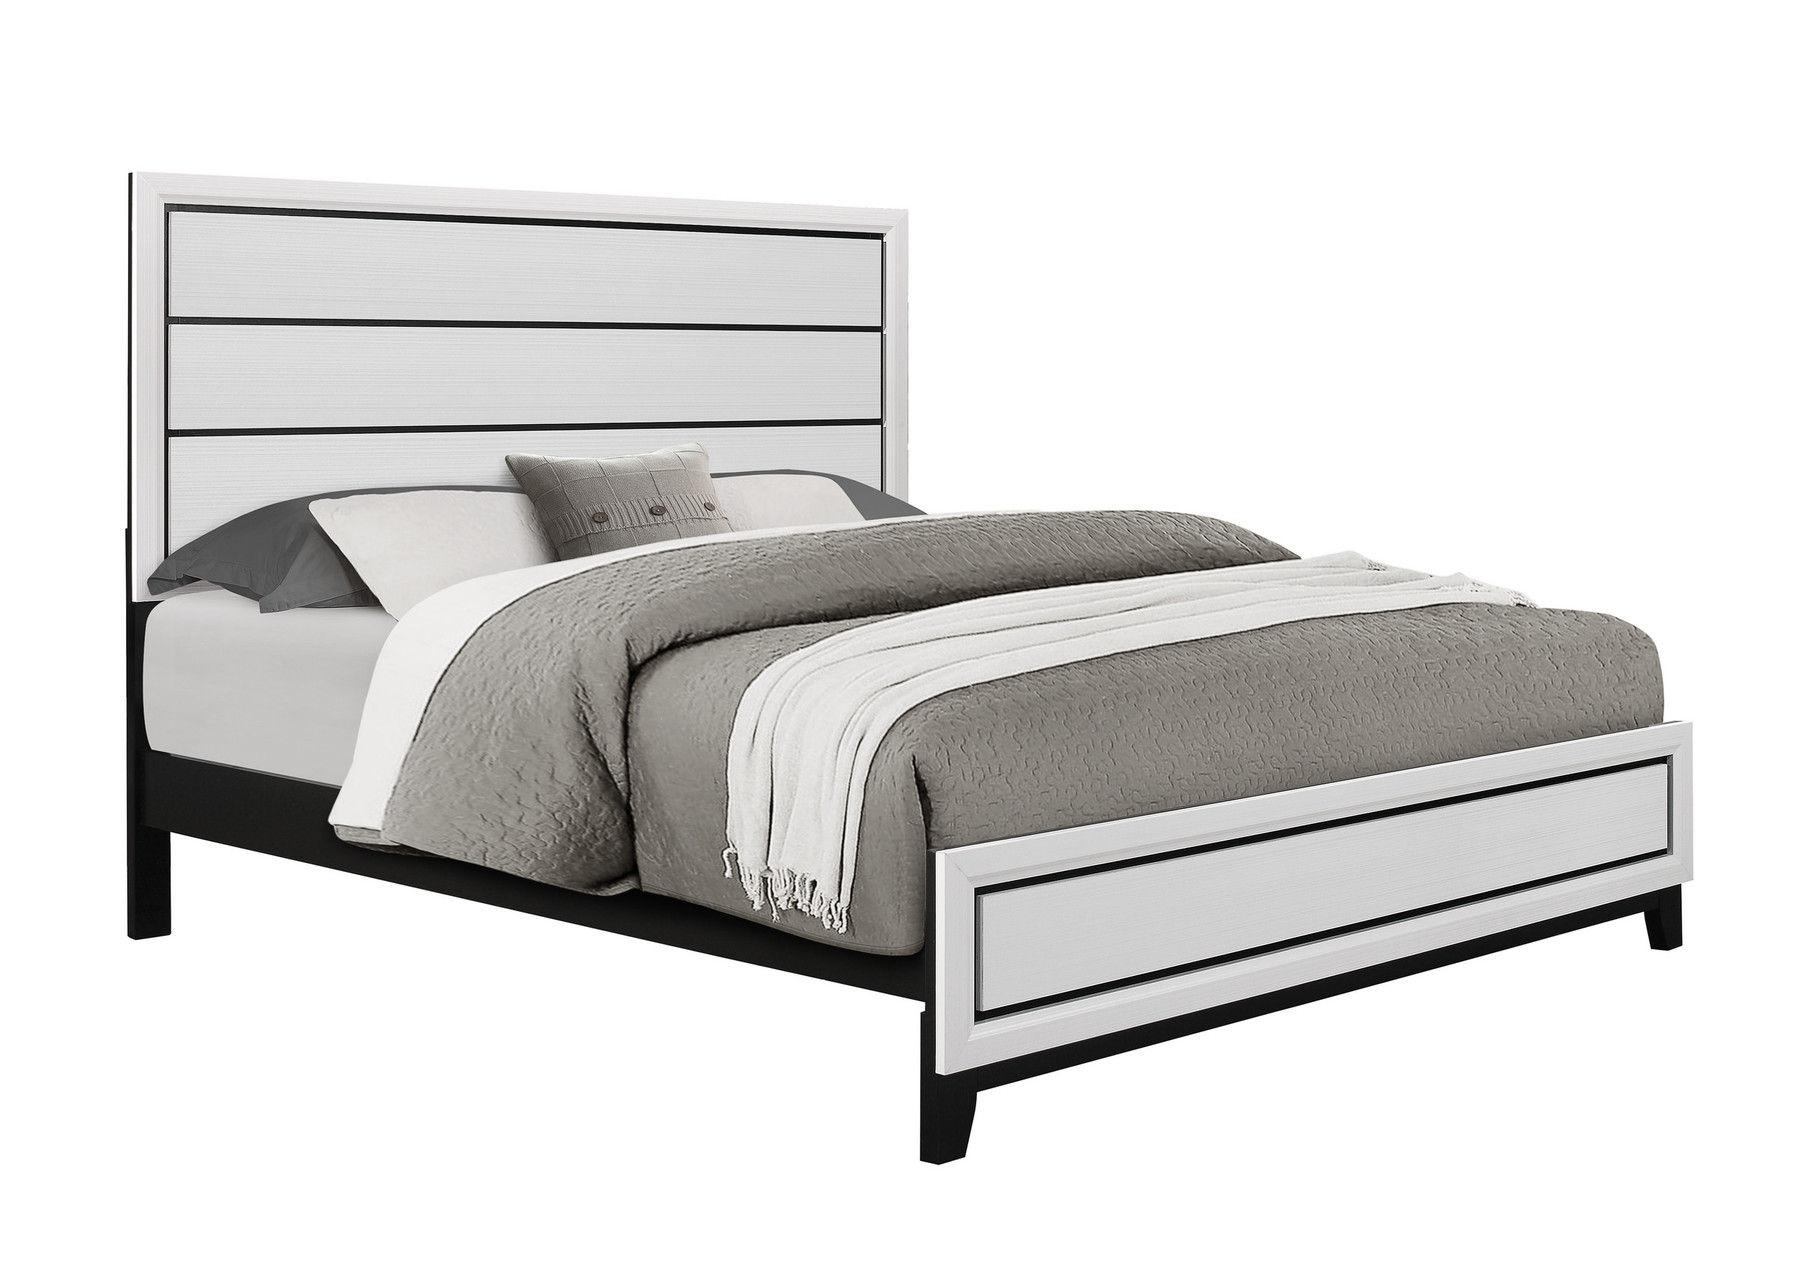 

    
KATE White Finish w/ Dark Accents Casual King Size Bed Global US
